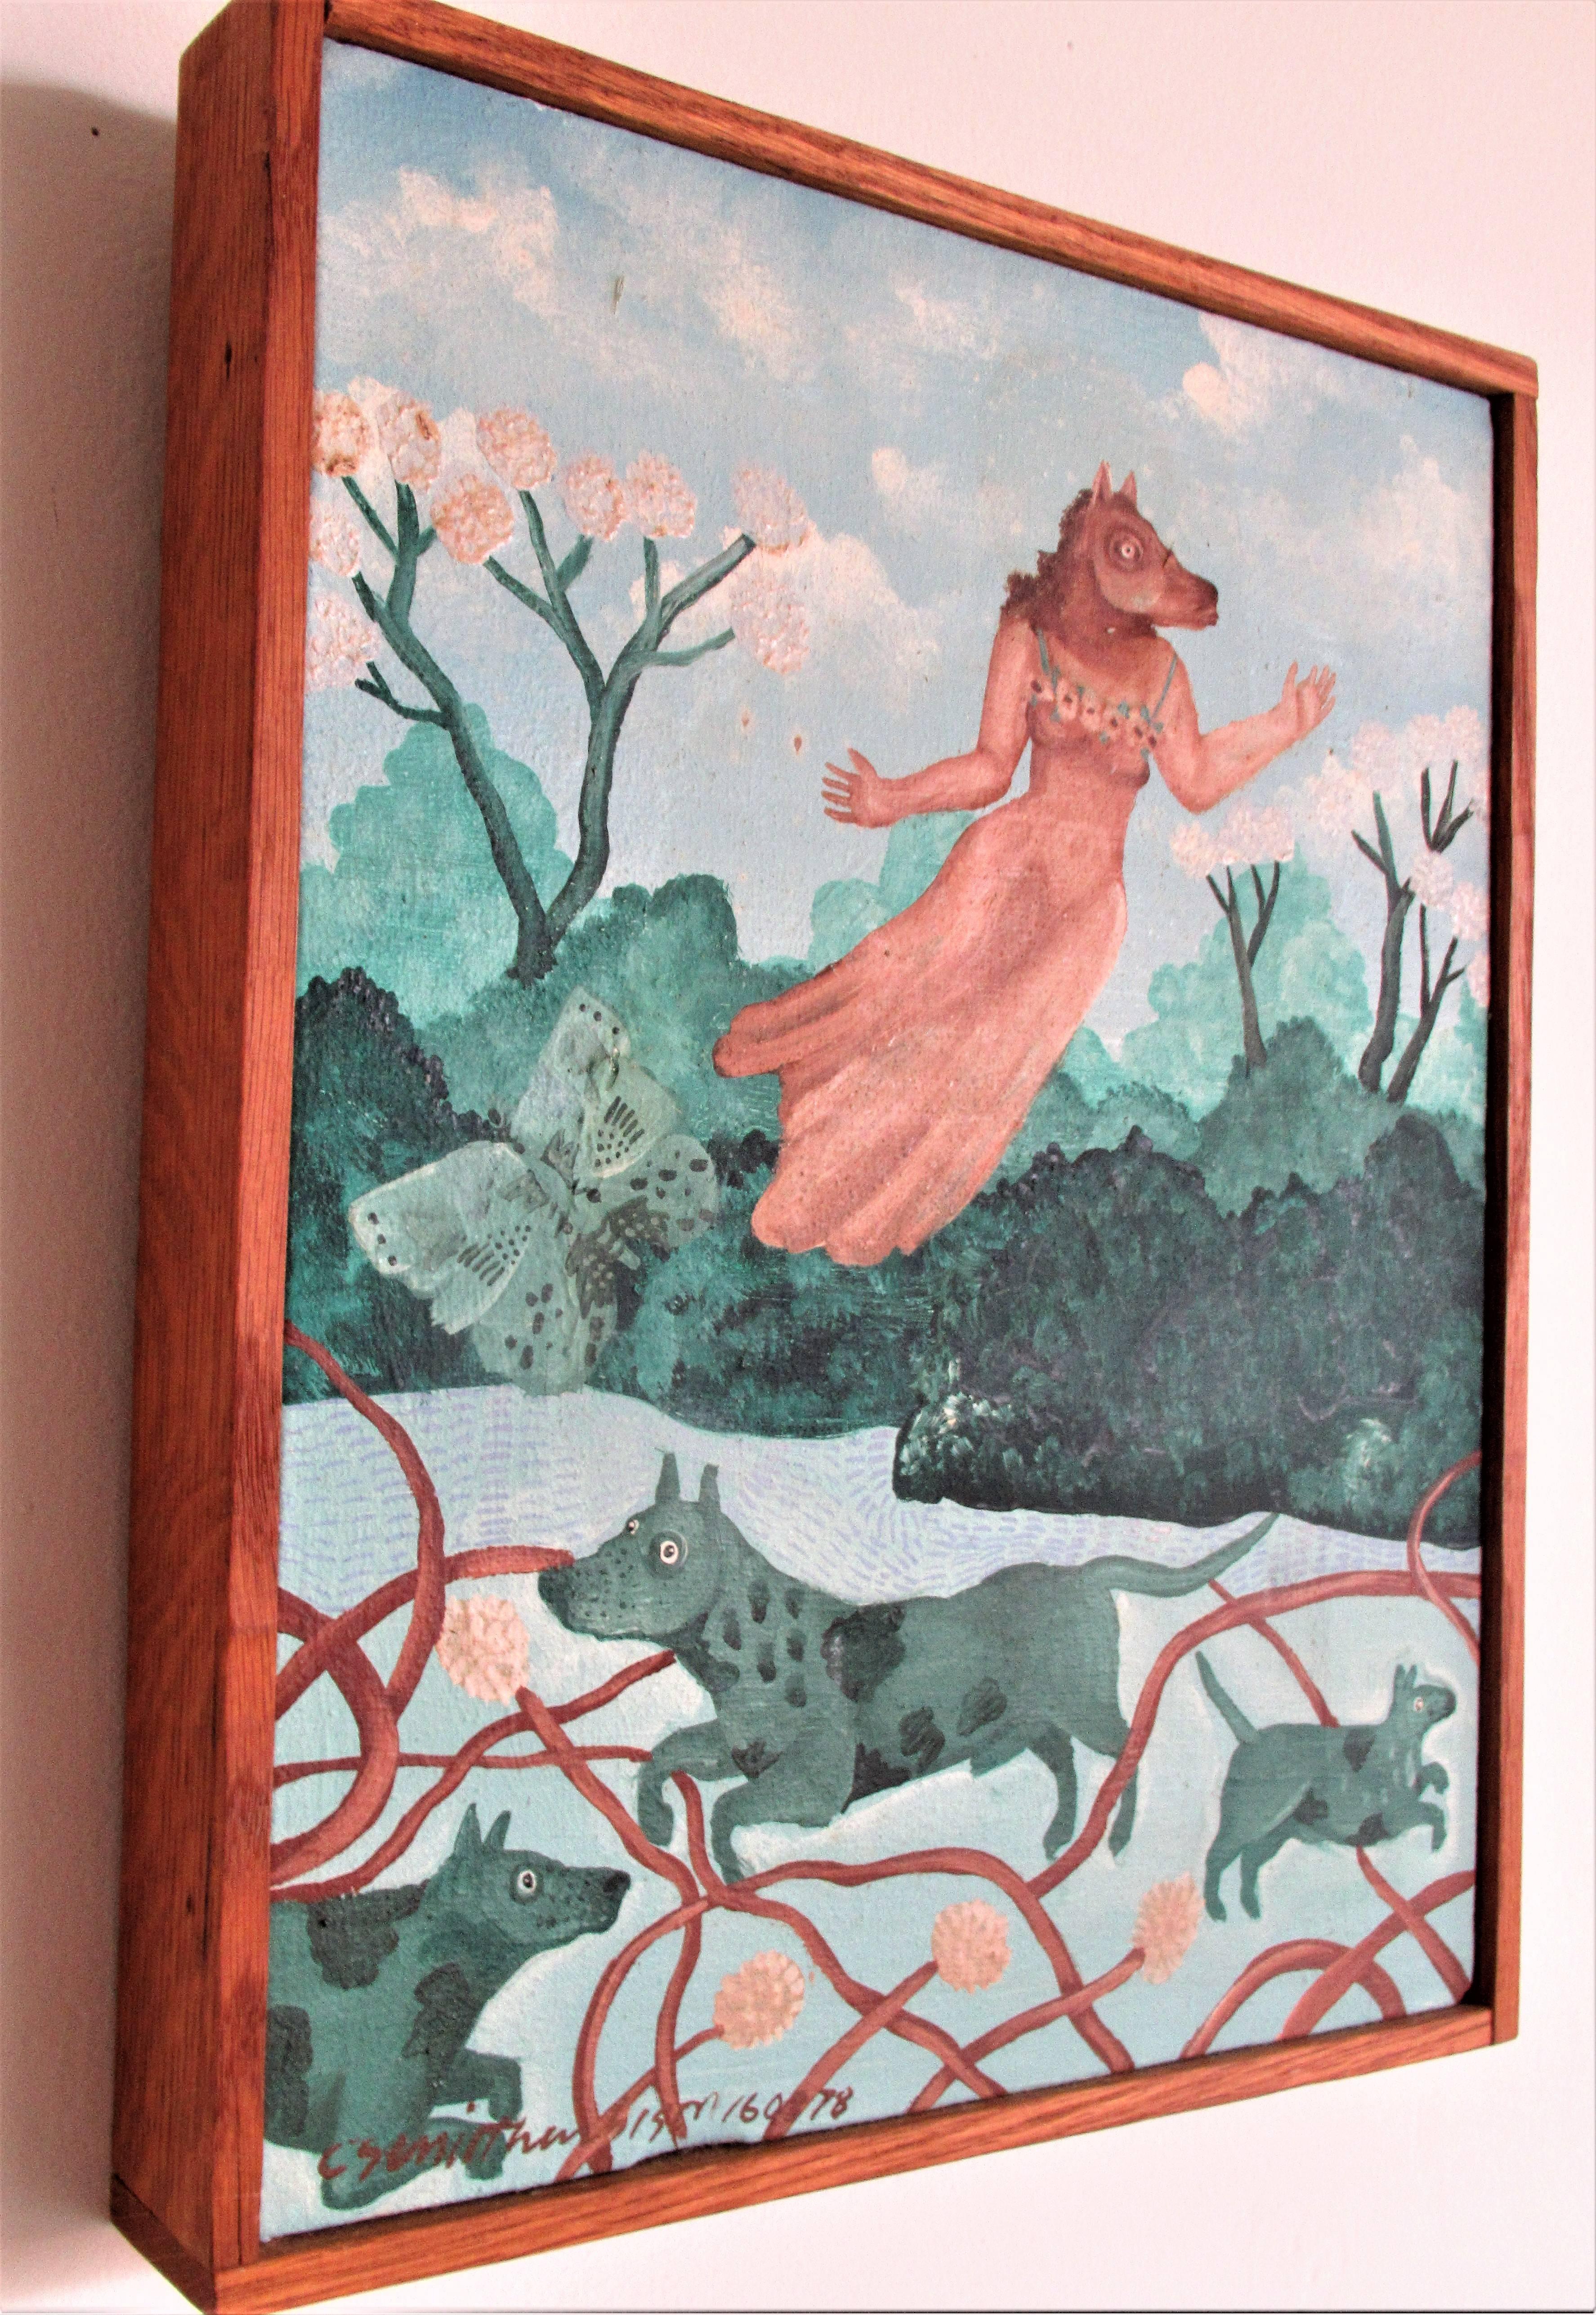 Surrealistic fantasy oil painting on canvas of a flying human animal horse wearing a dress / jumping dog creatures / butterfly all in an ethereal landscape with pond by acclaimed award winning Canada artist painter Catherine Senitt - Harbison -